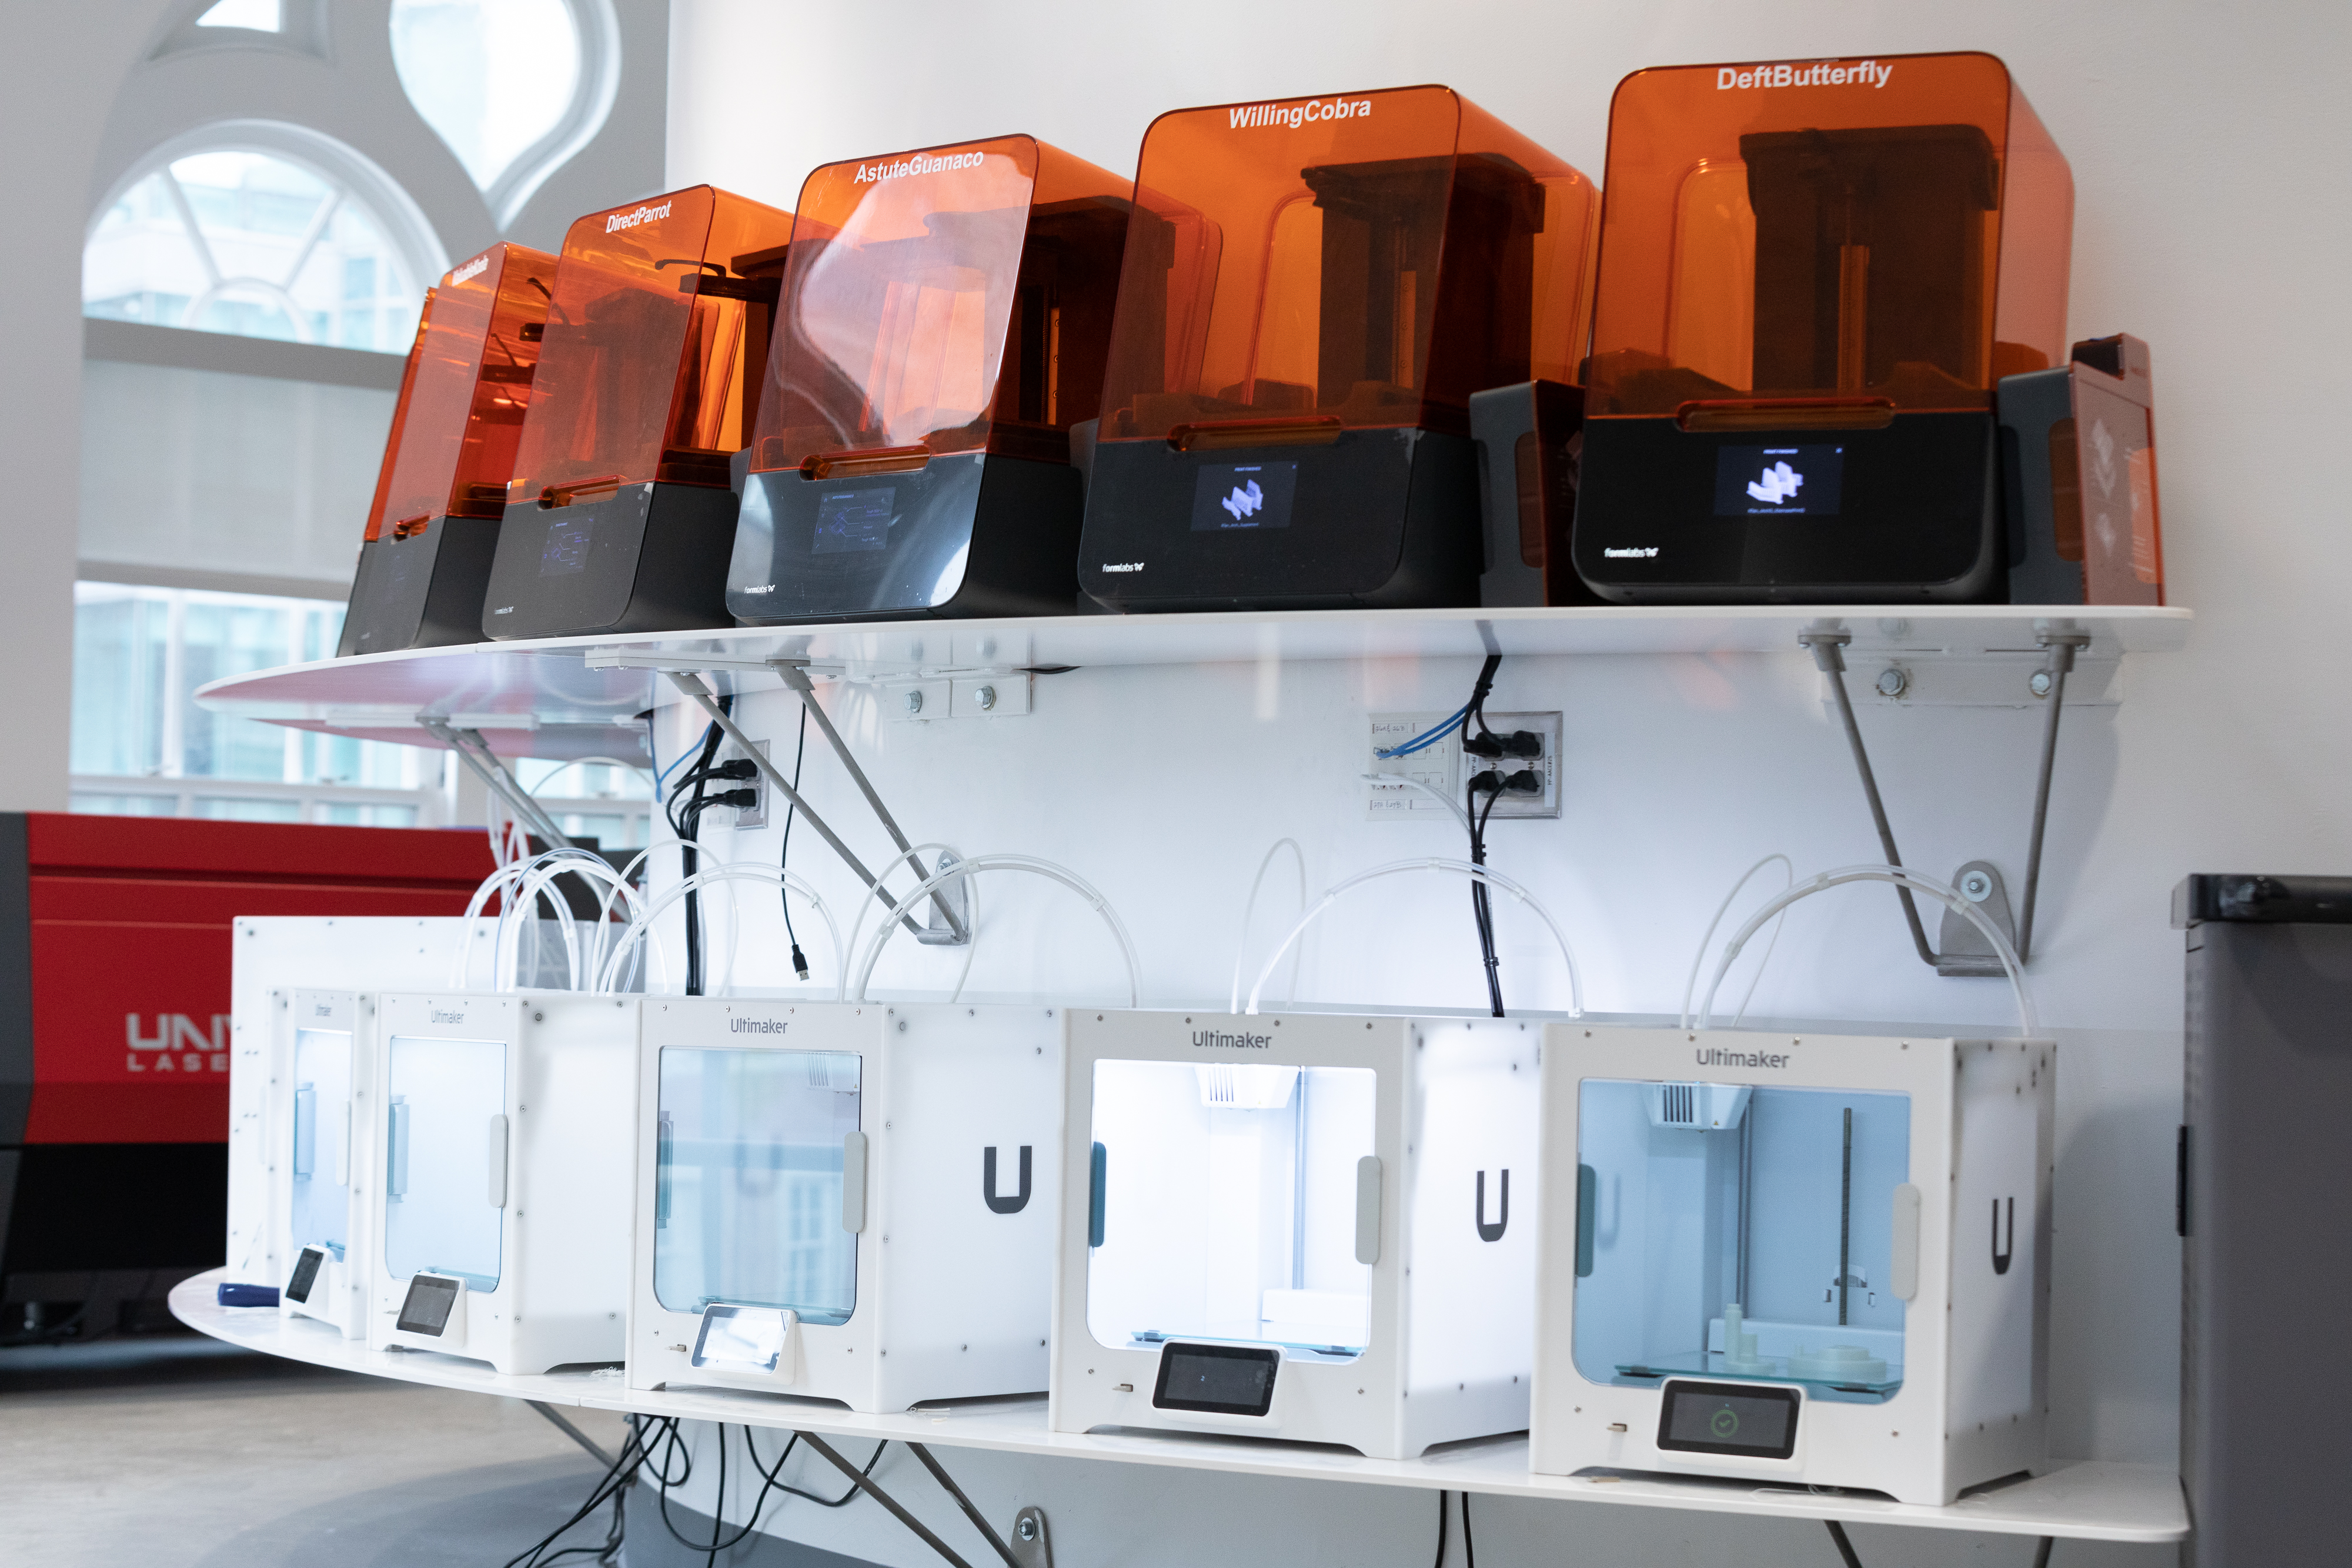 The Cooper Union's AACE facility houses a range of advanced technologies, including desktop 3D printers (pictured). Photo via The Cooper Union.